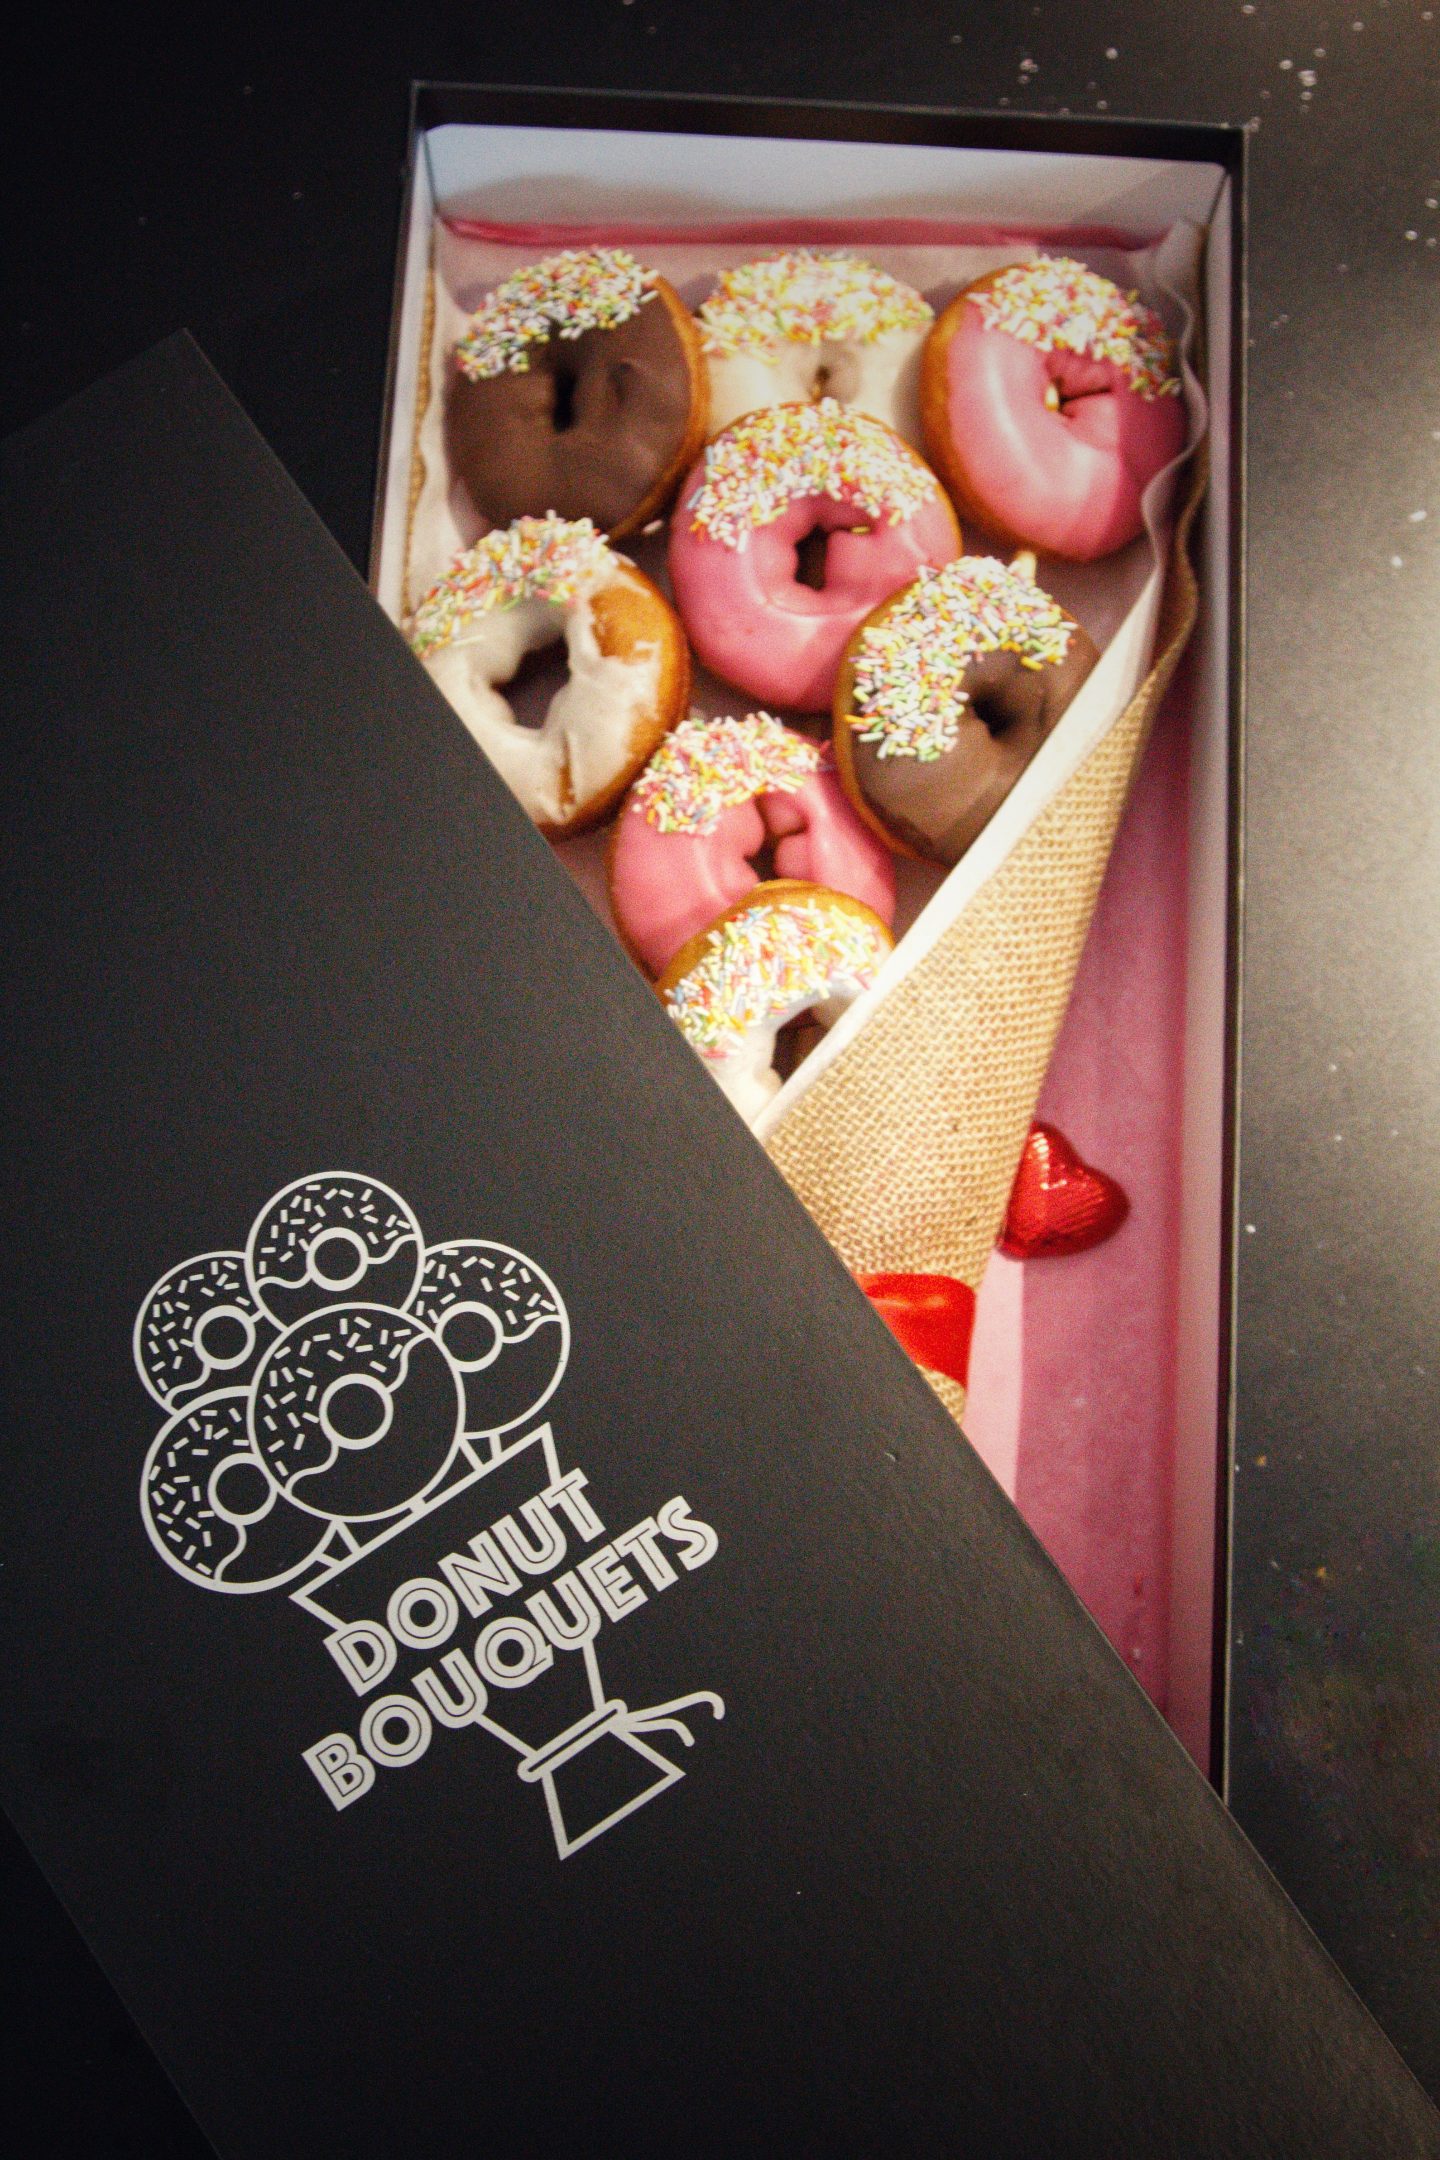 Donut delivery London Unique gifts Flower alternatives ...